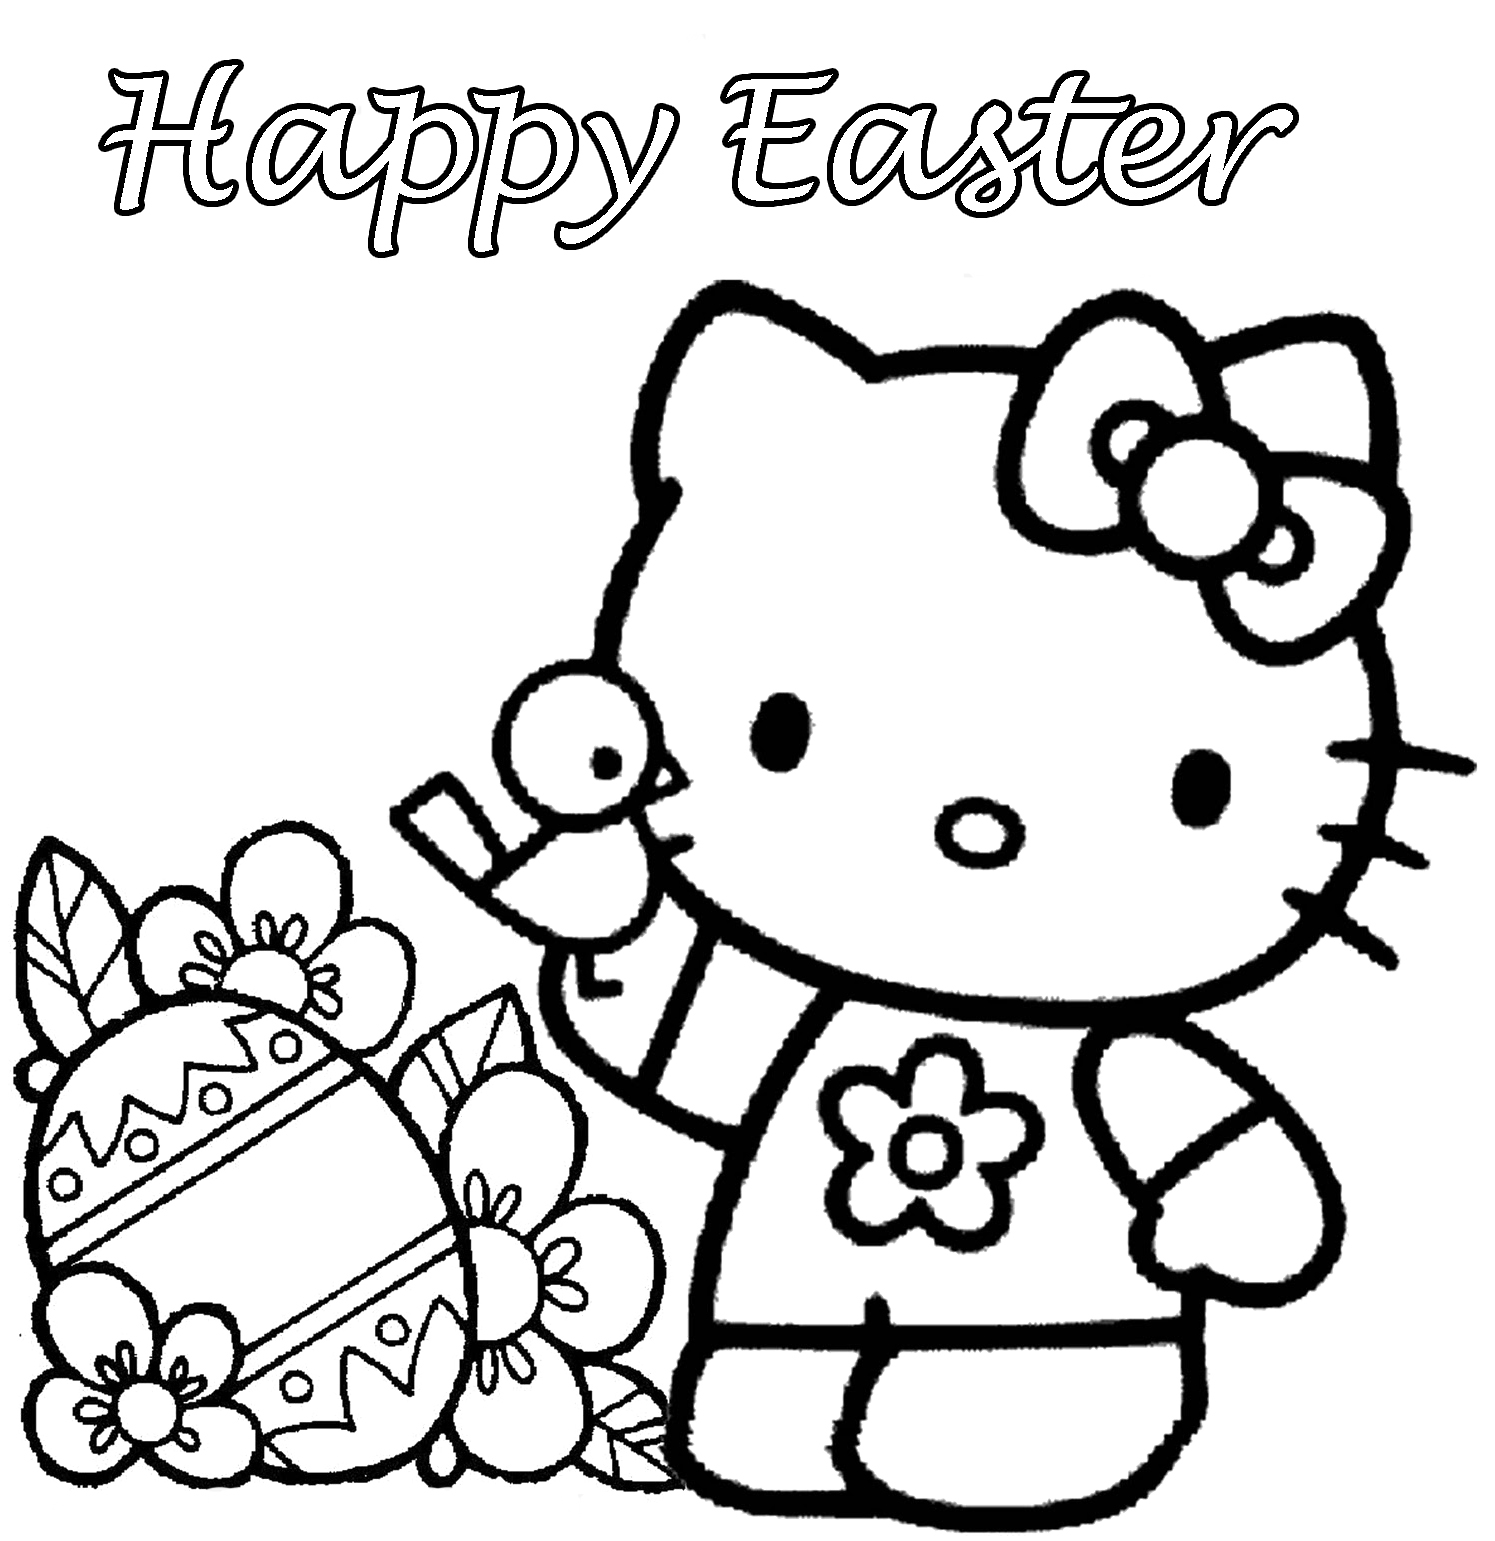 Happy Easter Printable Coloring Pages at GetDrawings | Free download